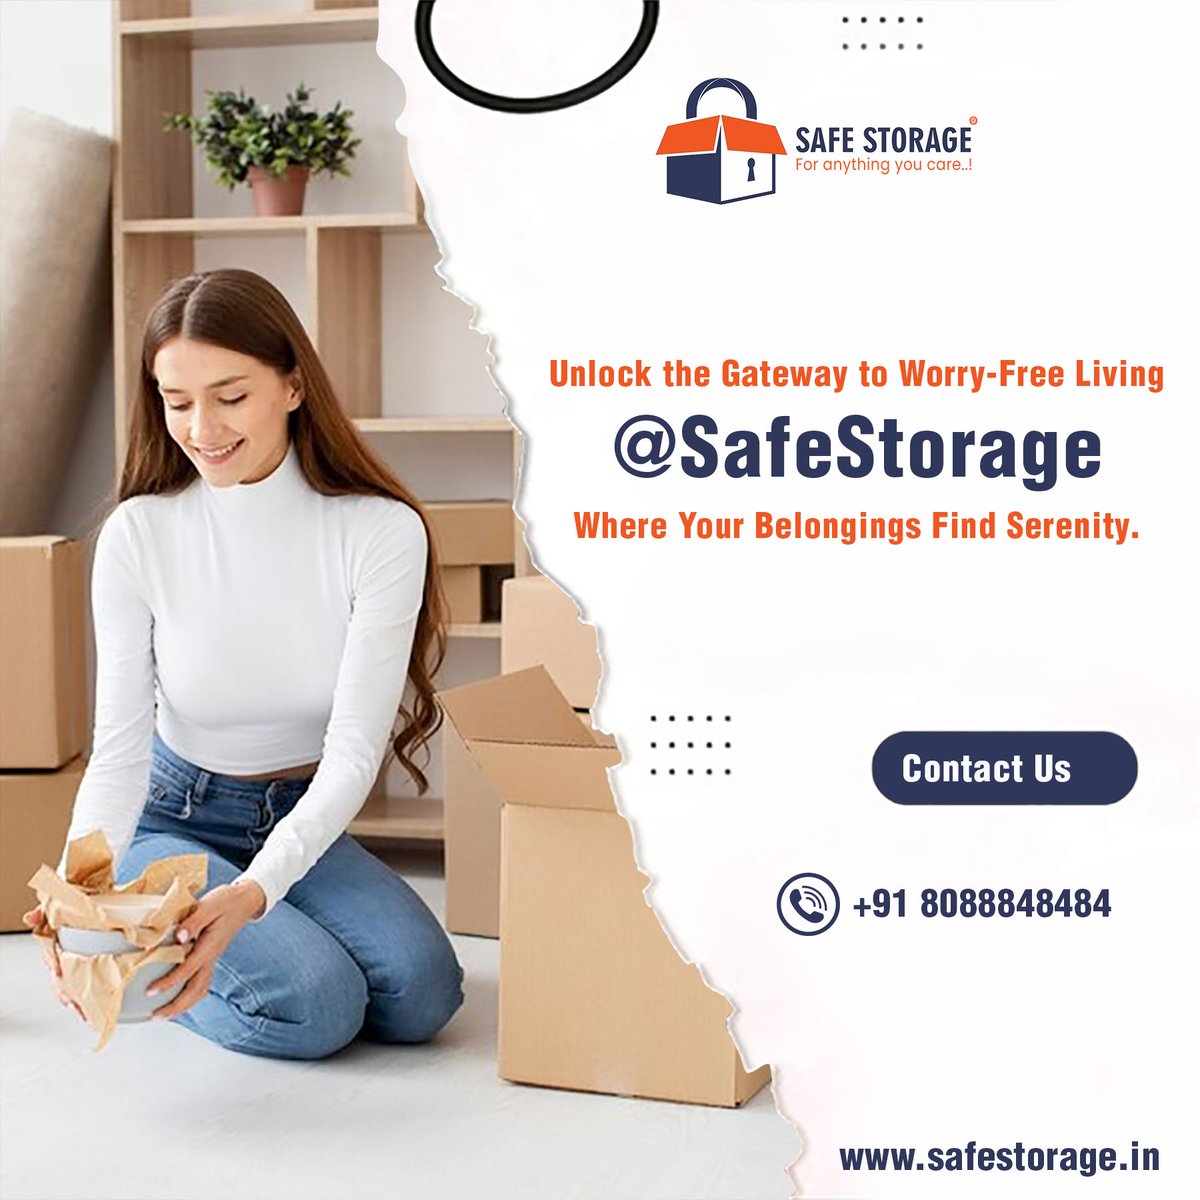 Discover the key to worry-free living with SafeStorage, where your belongings find serenity in secure storage solutions. Unlock peace of mind today! 

Our website -buff.ly/2pK6eaM
Call now: 8088848484
#SafeStorage #StorageFacility #SecureStorage #SelfStorage #explore